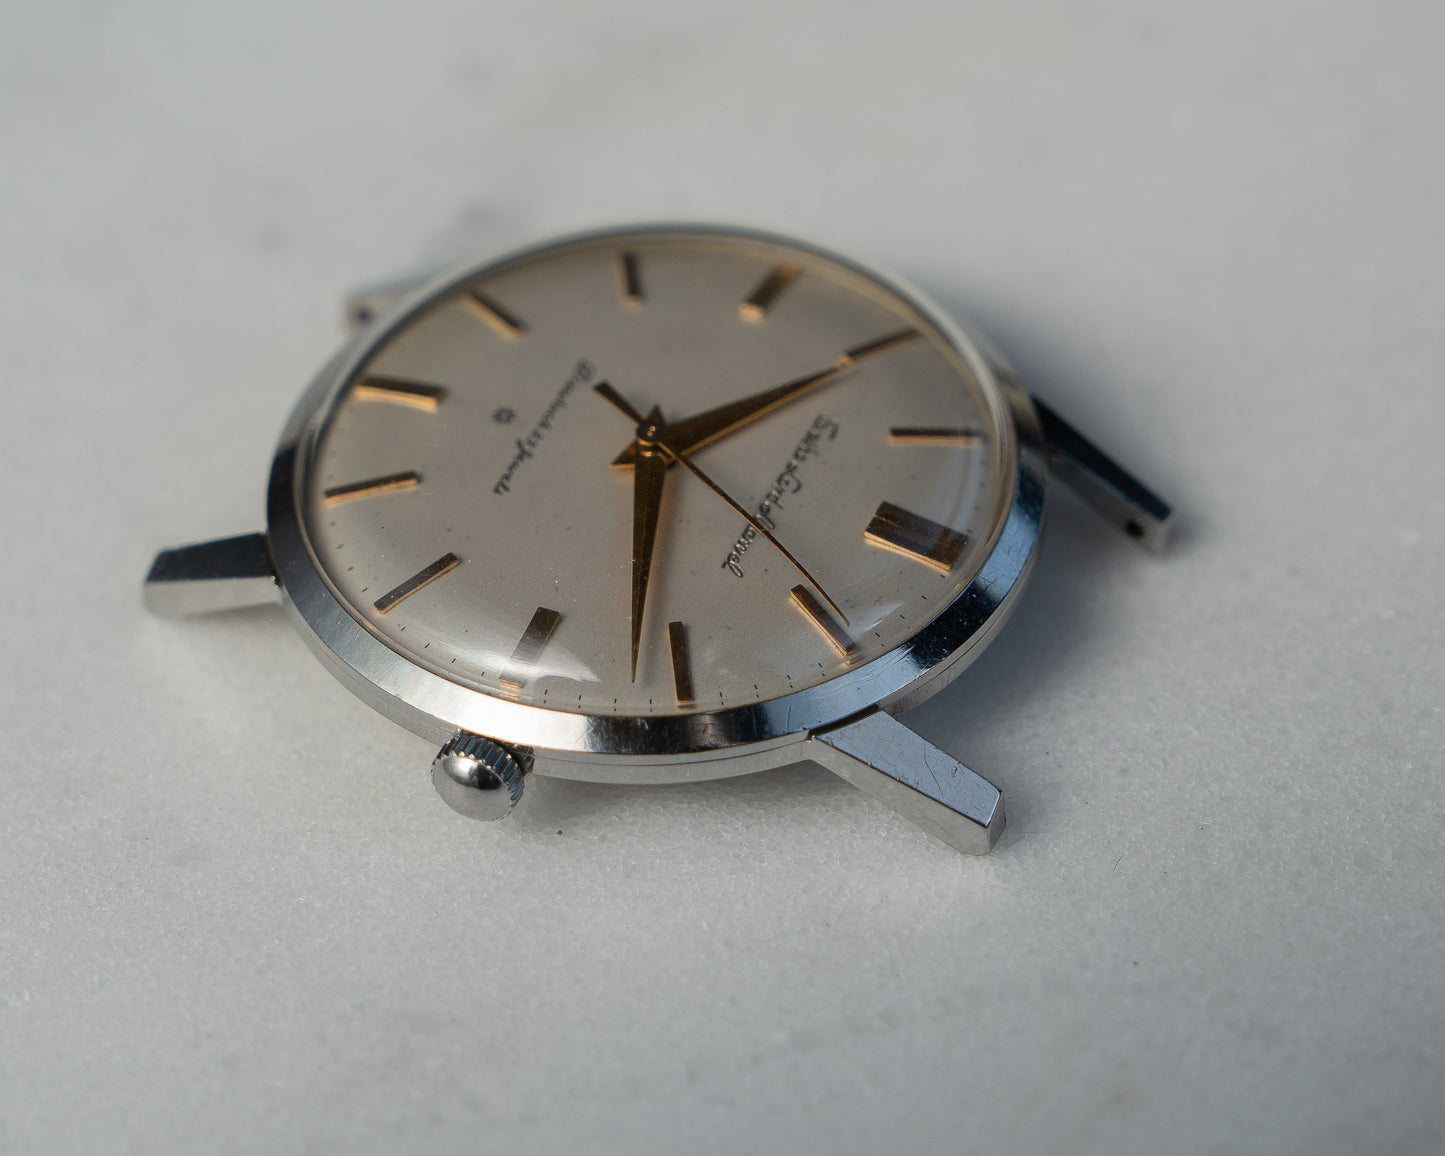 Seiko Lord Marvel 1st generation, carved mark 3 dial, Oct 1959, "Shirokin"